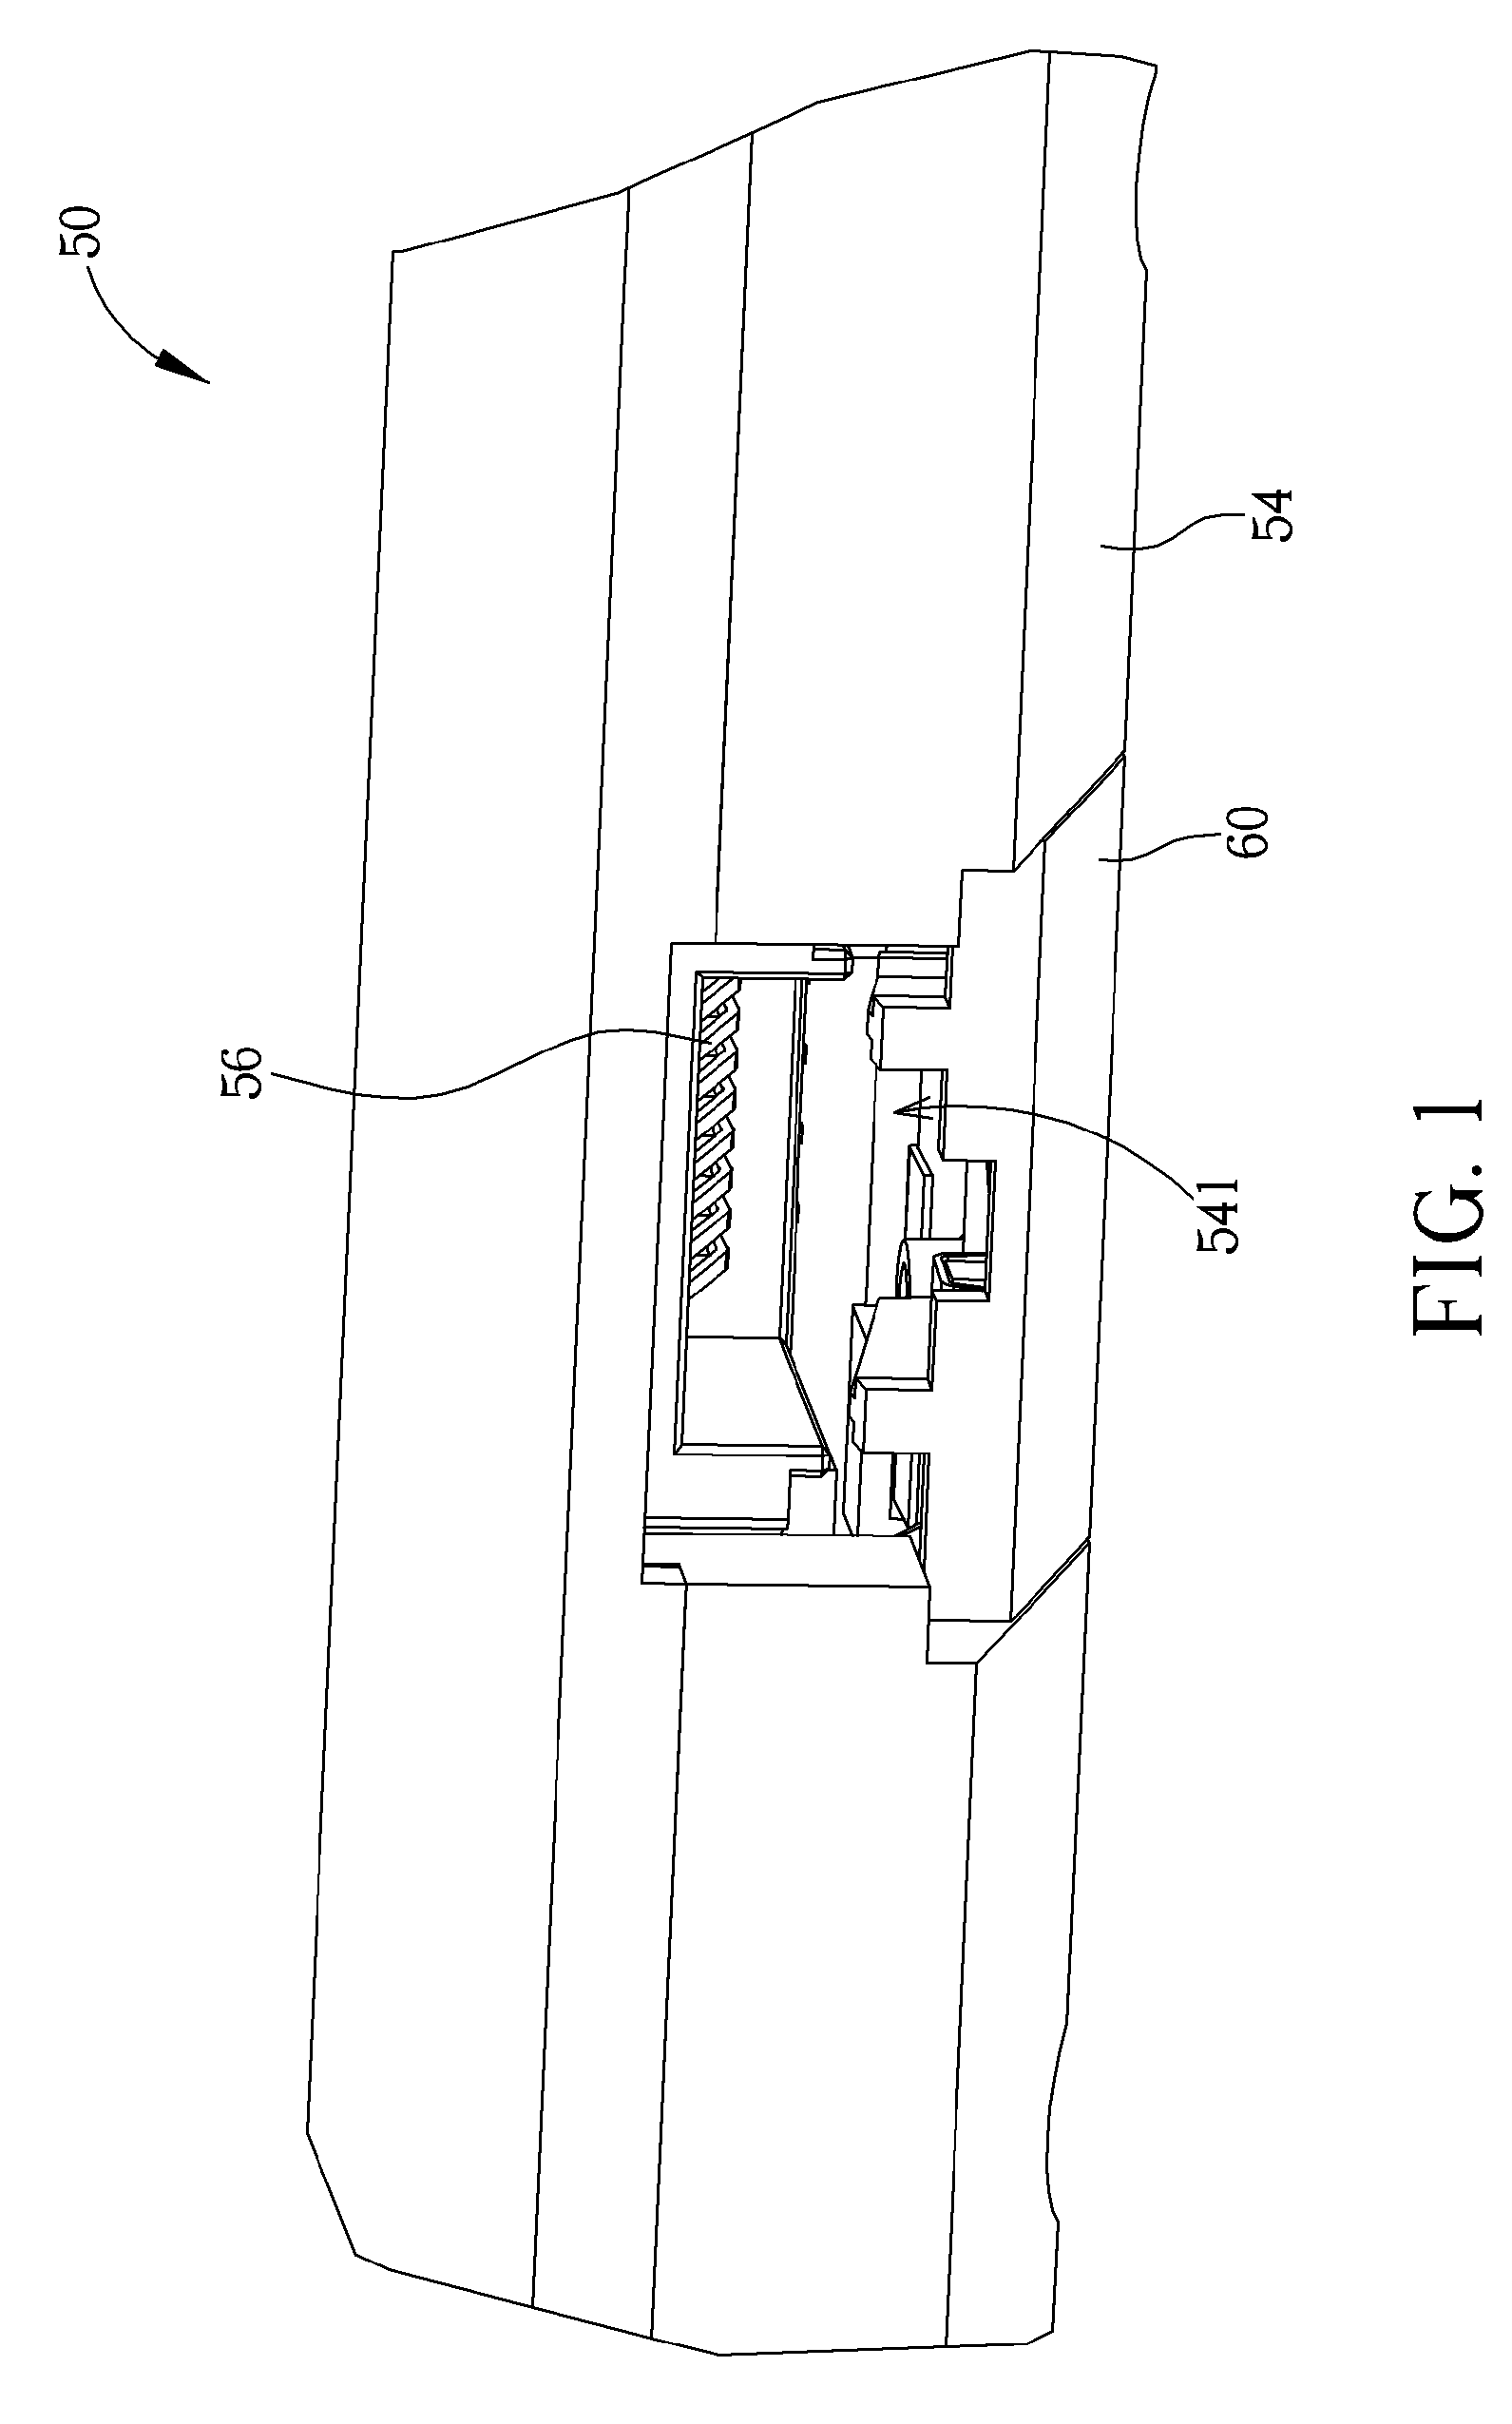 Connector mechanism for securing a plug to a casing